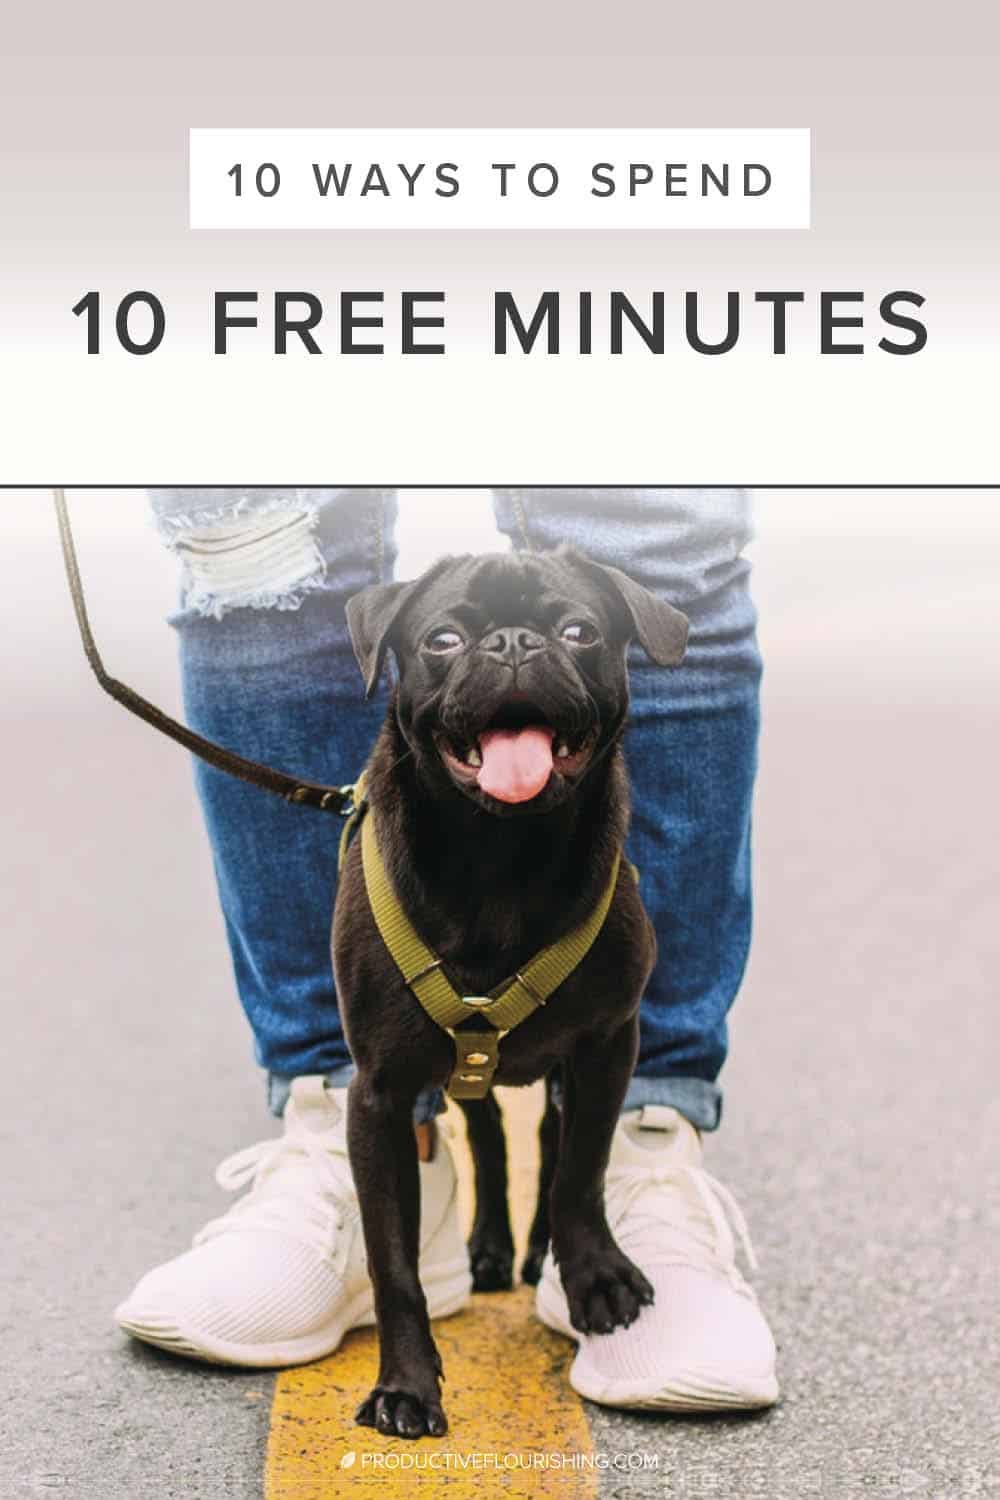 When we have ten spare minutes at work, we often flip to Facebook, investigate Instagram, or putter off to see if the coffee’s finished brewing. However, we might put our free time to better use, using them to energize our small business productivity levels or reach unrealized entrepreneurship goals. Here are 10 productive ways to spend 10 free minutes. #timemanagement #entrepreneurshipgoals #productiveflourishing 